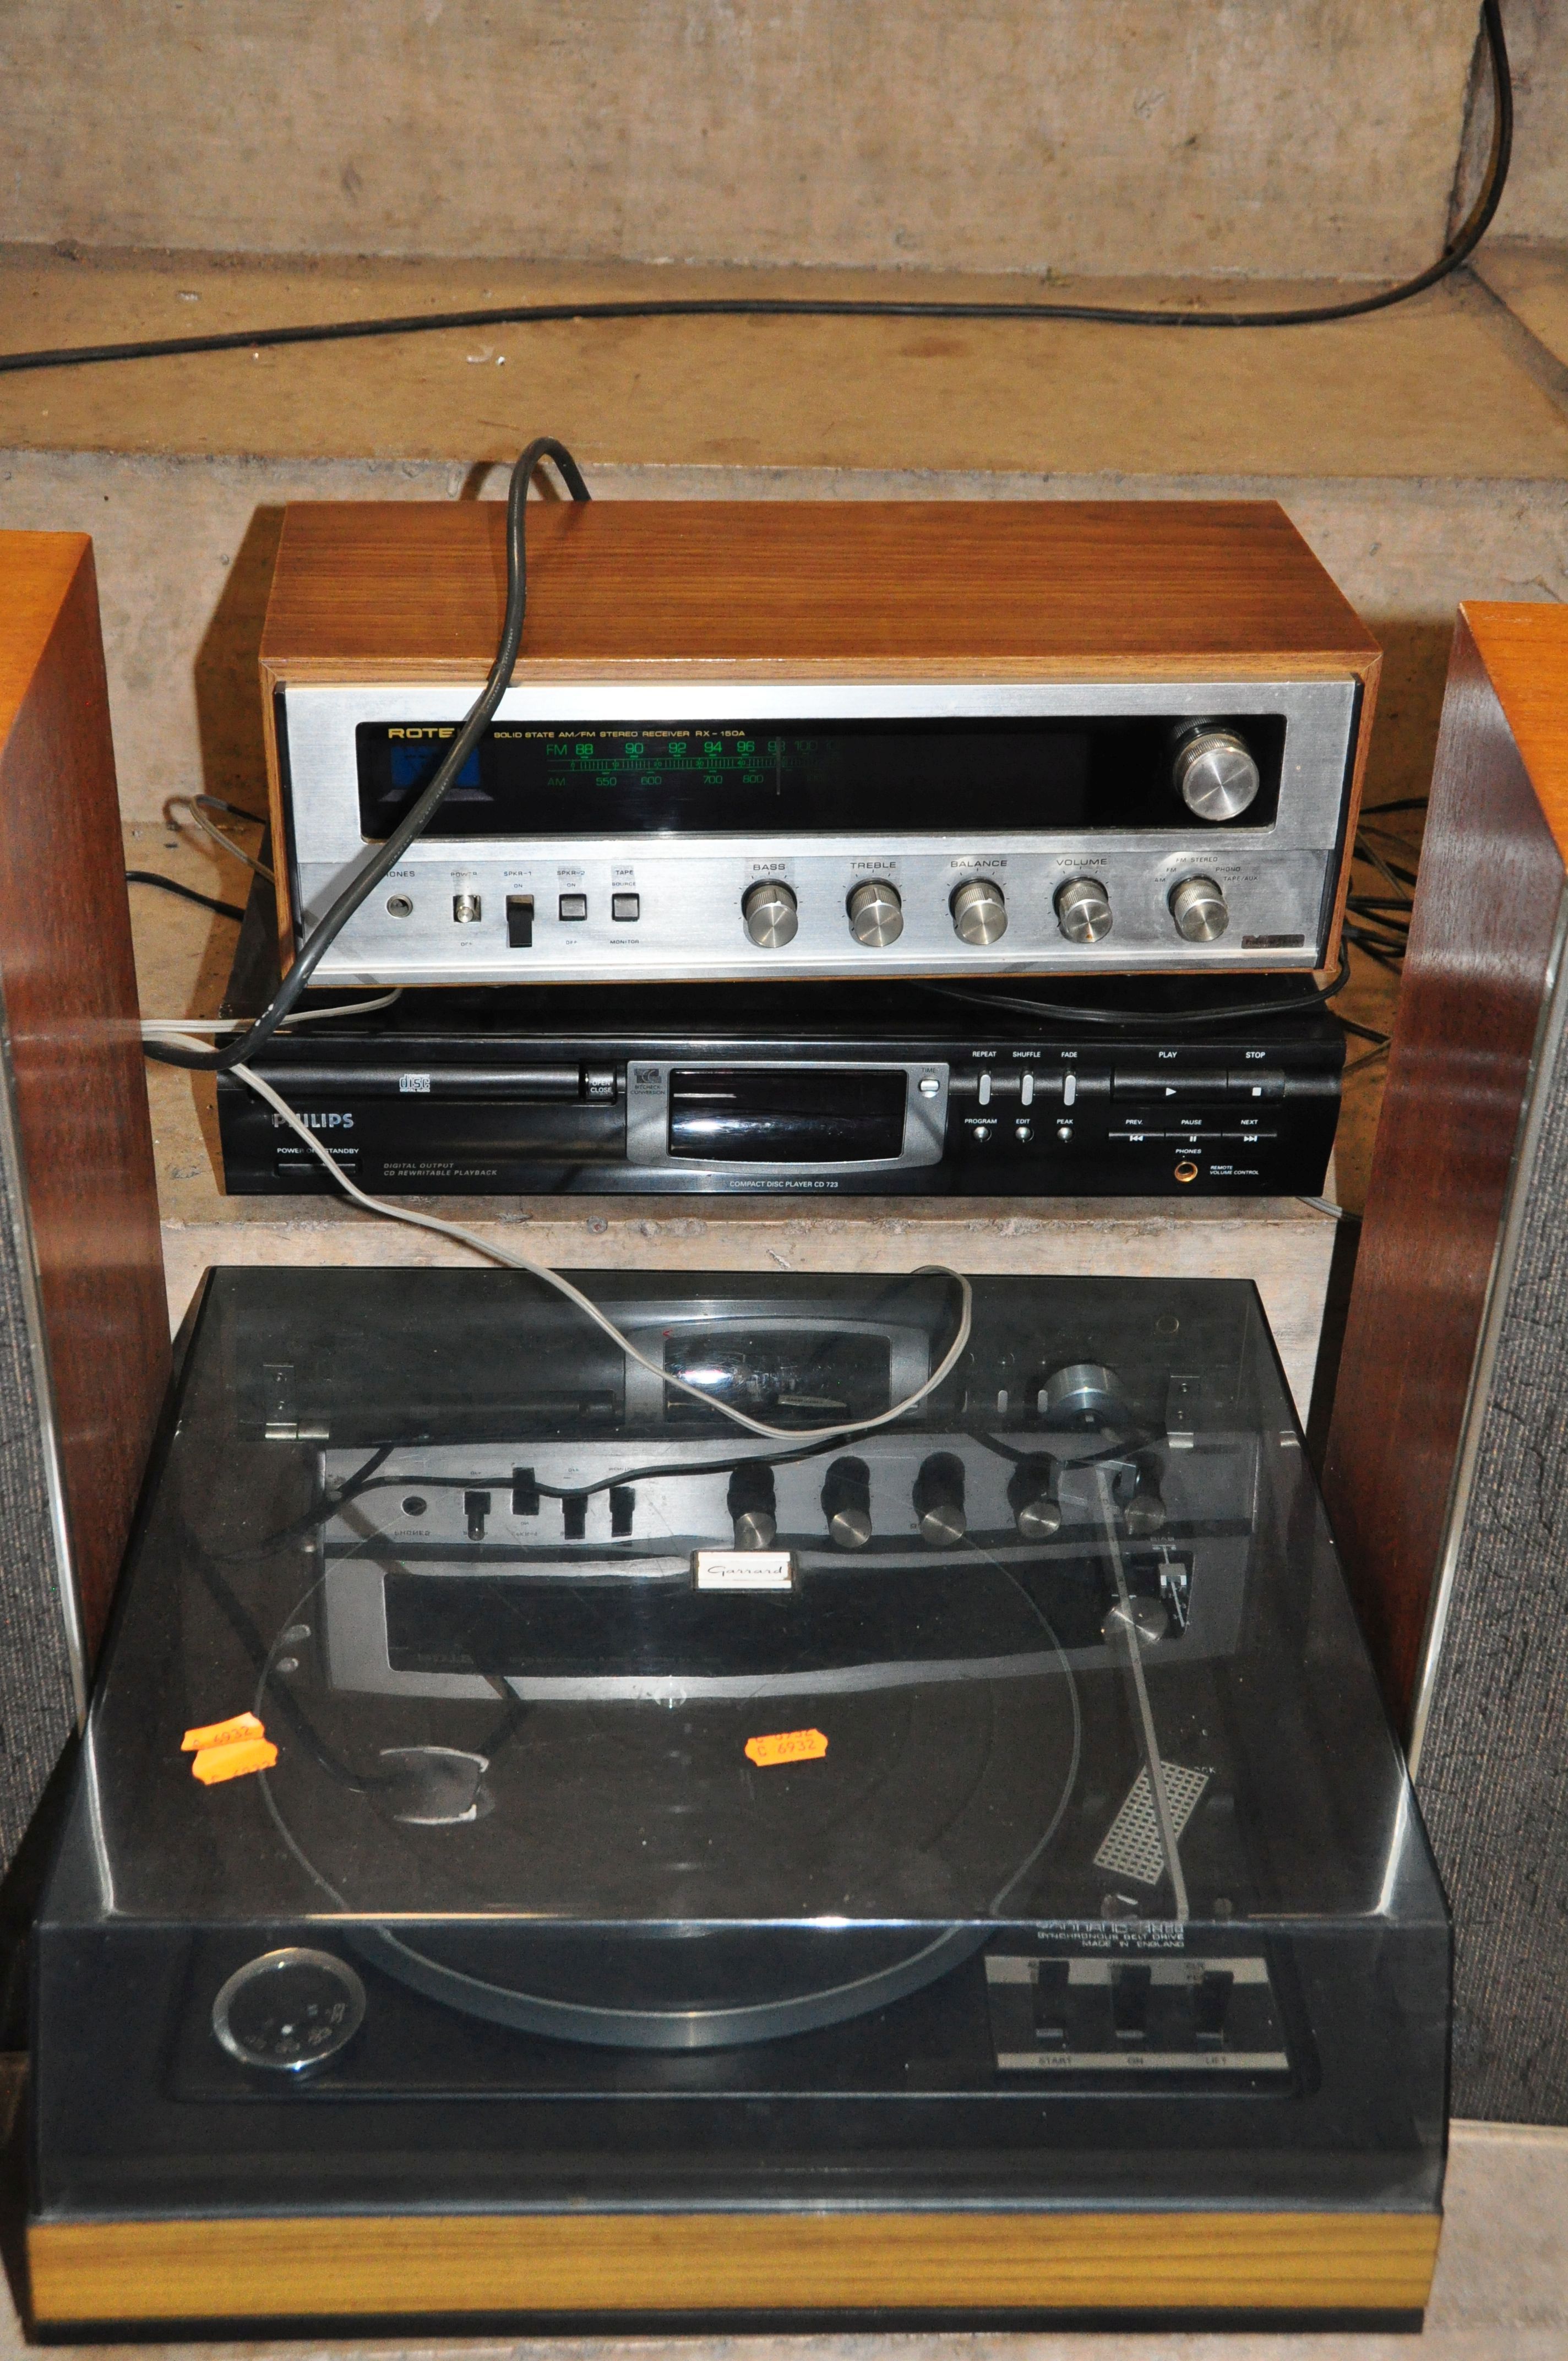 A ROTEL RX-150A VINTAGE STEREO RECEIVER with a walnut effect covering, a Garrard 86SB turntable, a - Image 2 of 4